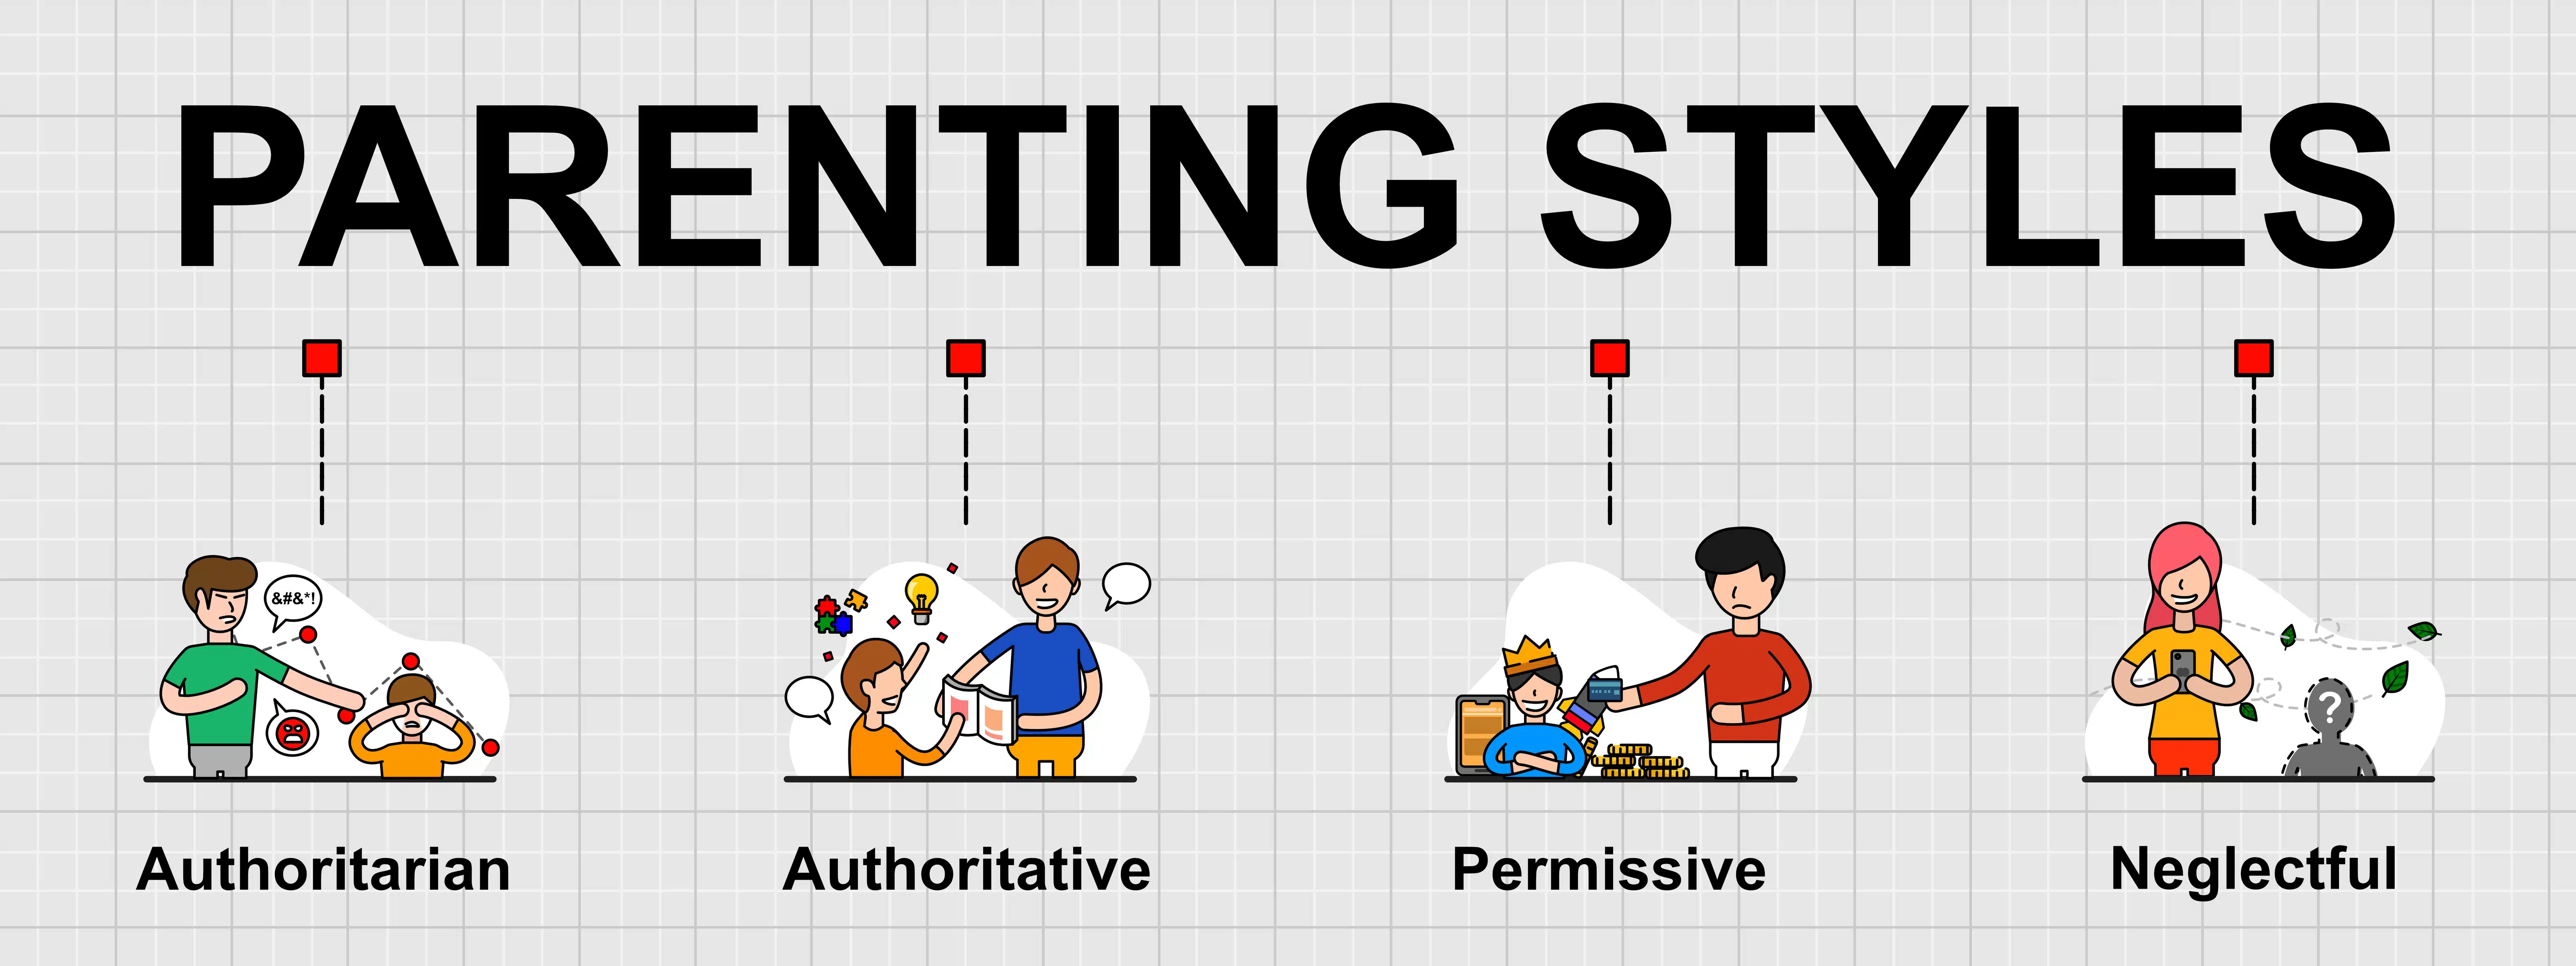 The four parenting styles: authoritarian, authoritative, permissive, and uninvolved or neglectful